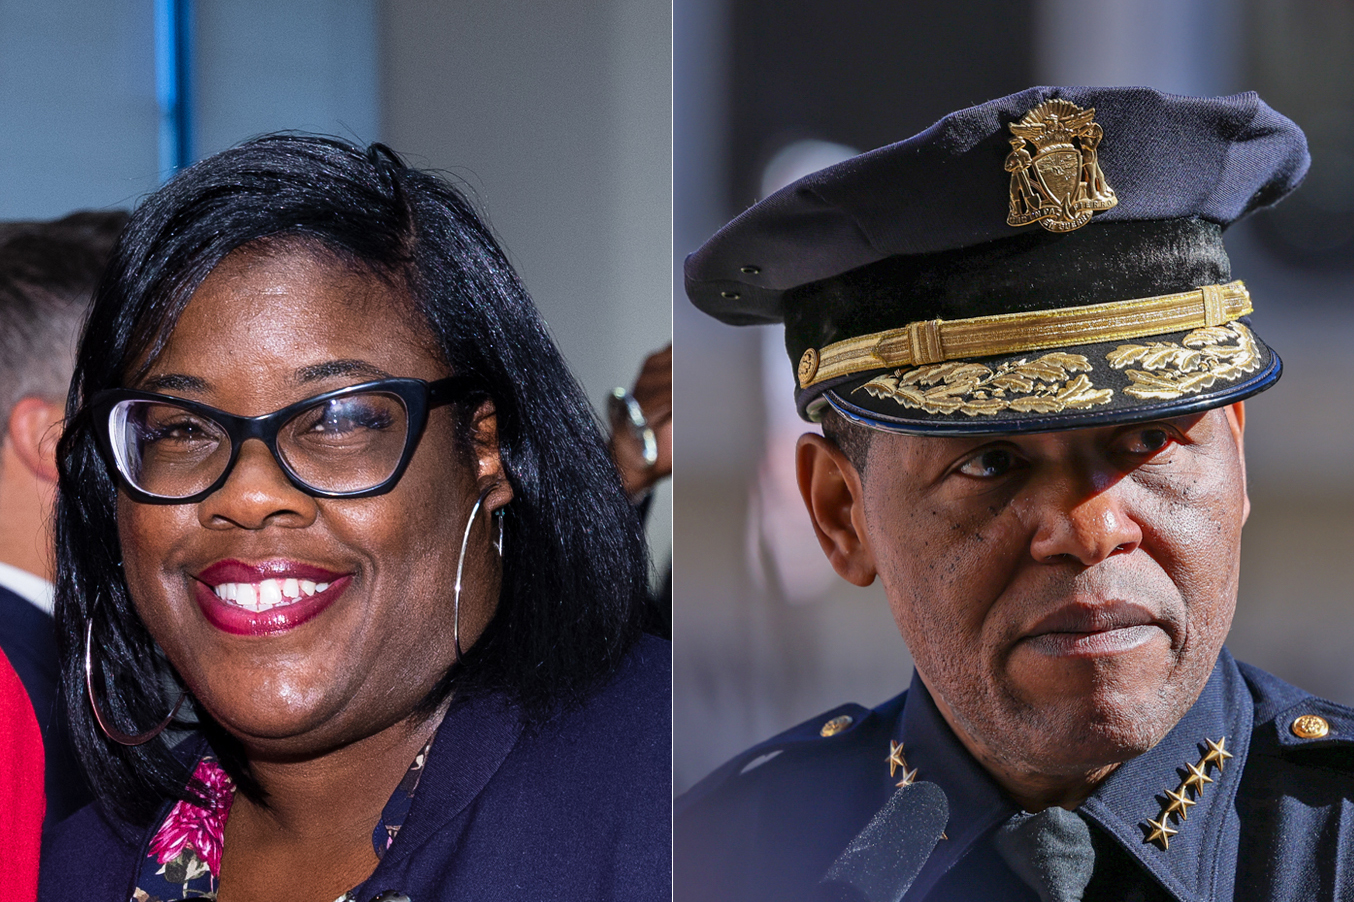 A woman with glasses smiling and a man in a police uniform with a serious expression.